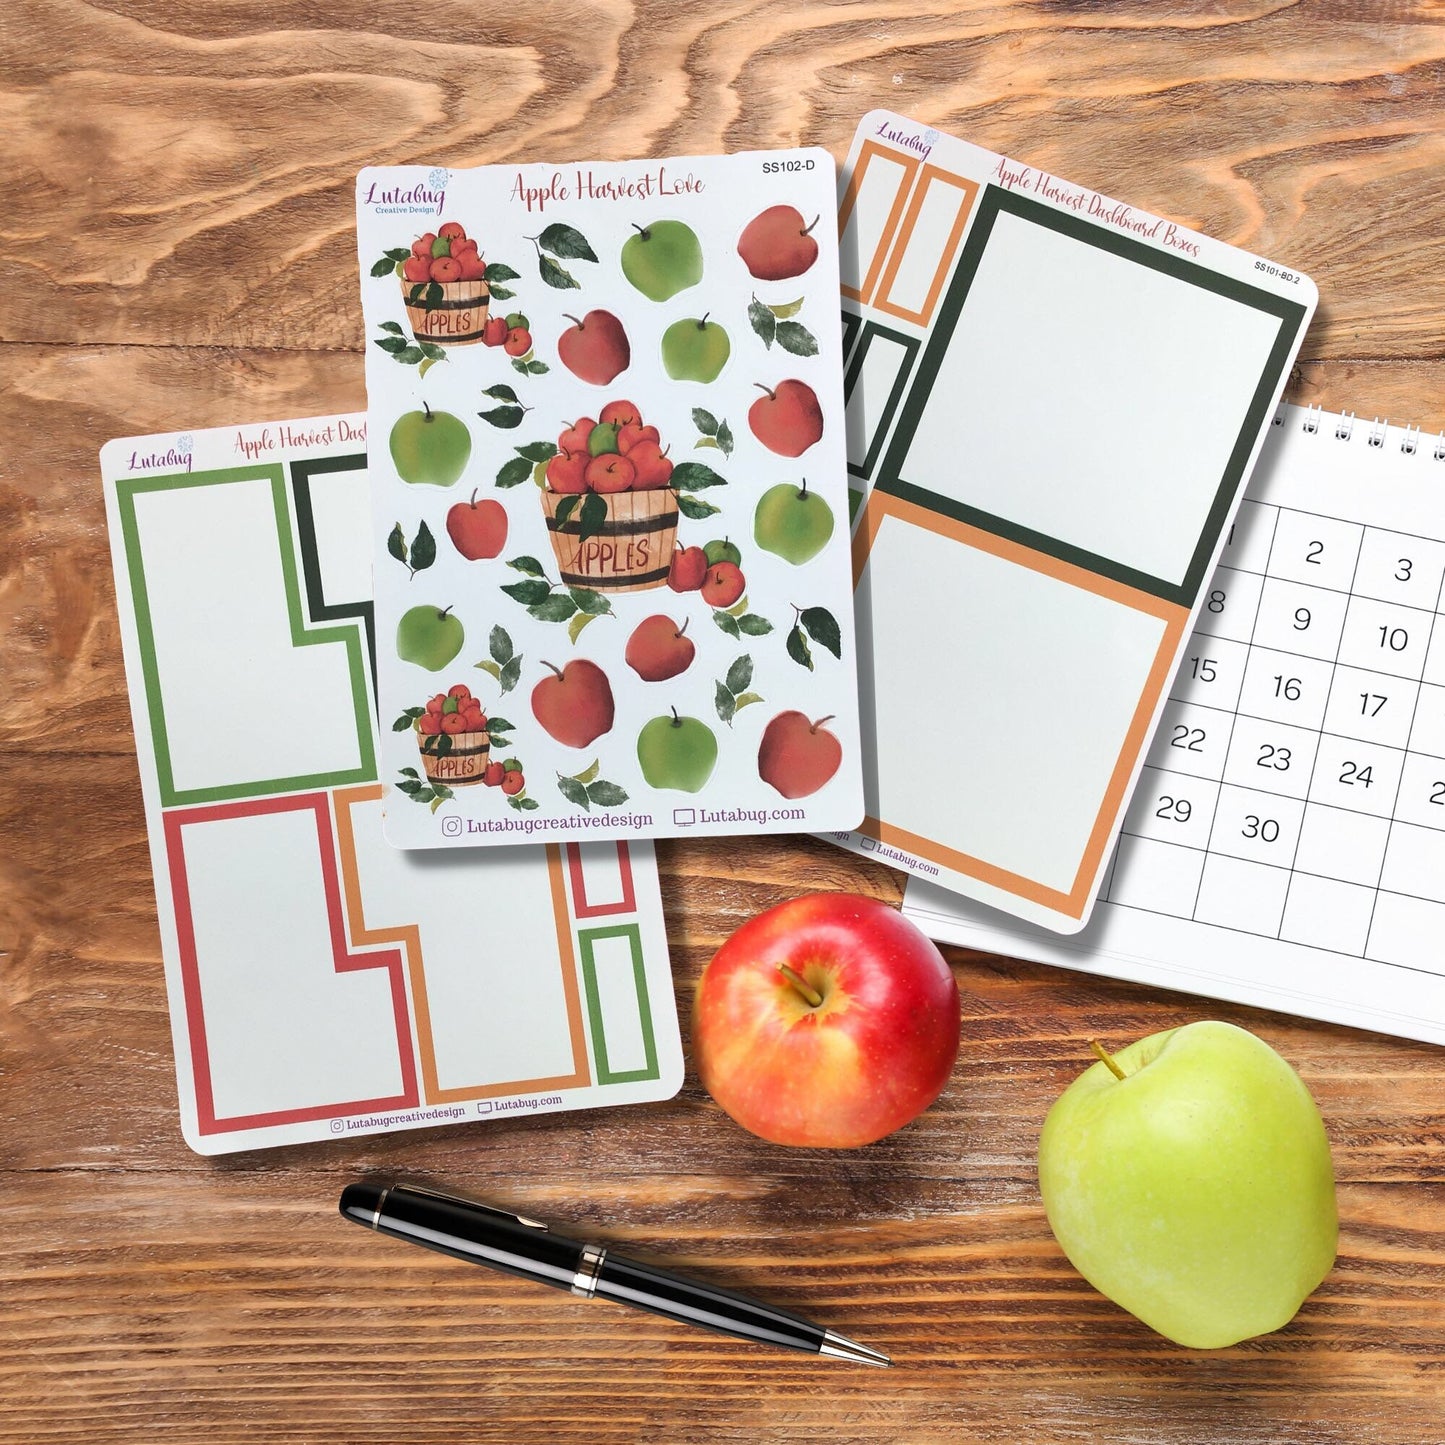 Apple Harvest Classic Dashboard Planner Deco and Box Sticker Kit